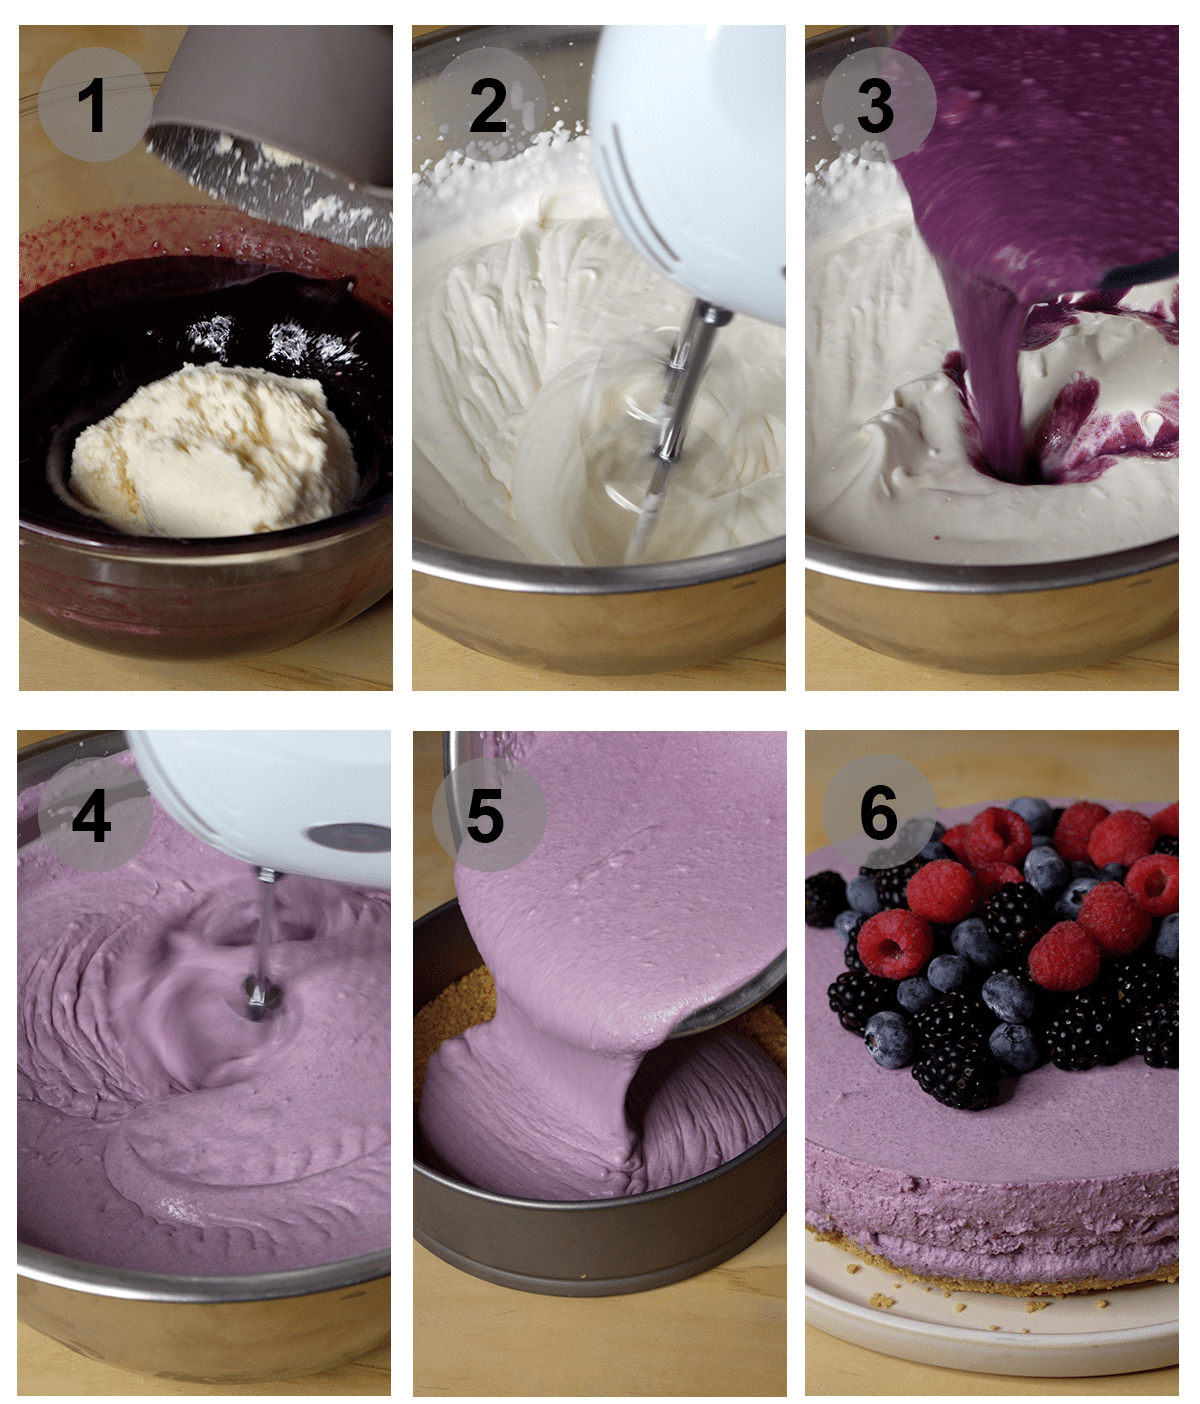 Step by step photos on how to make the berry mousse and assemble the cake